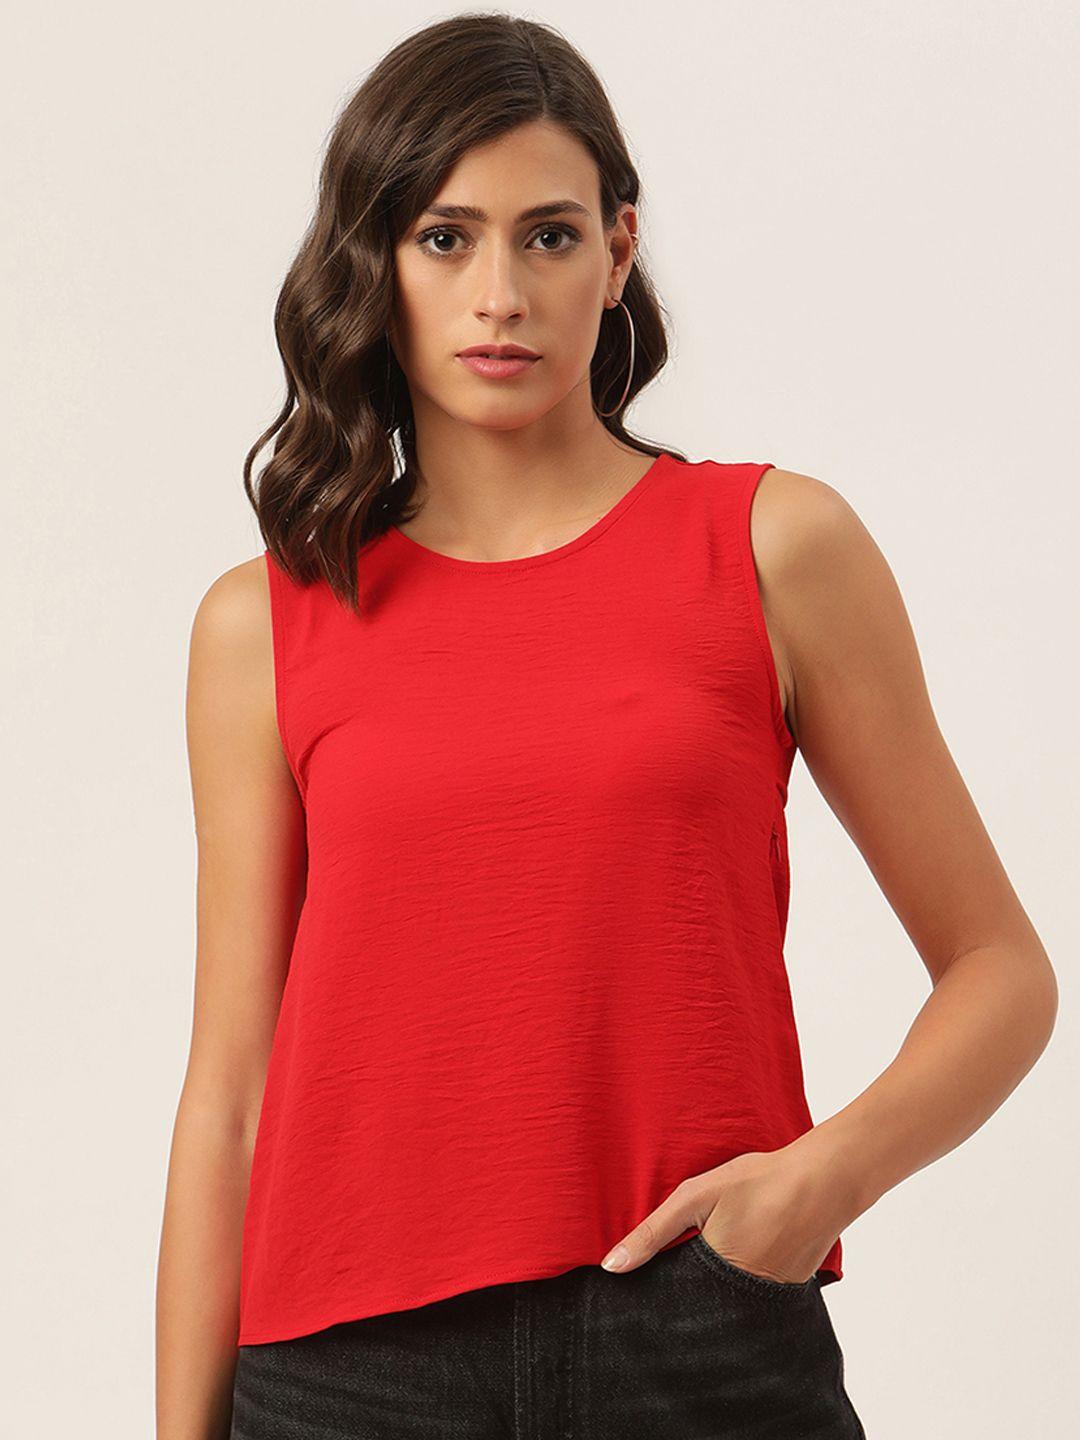 kendall & kylie red styled back top